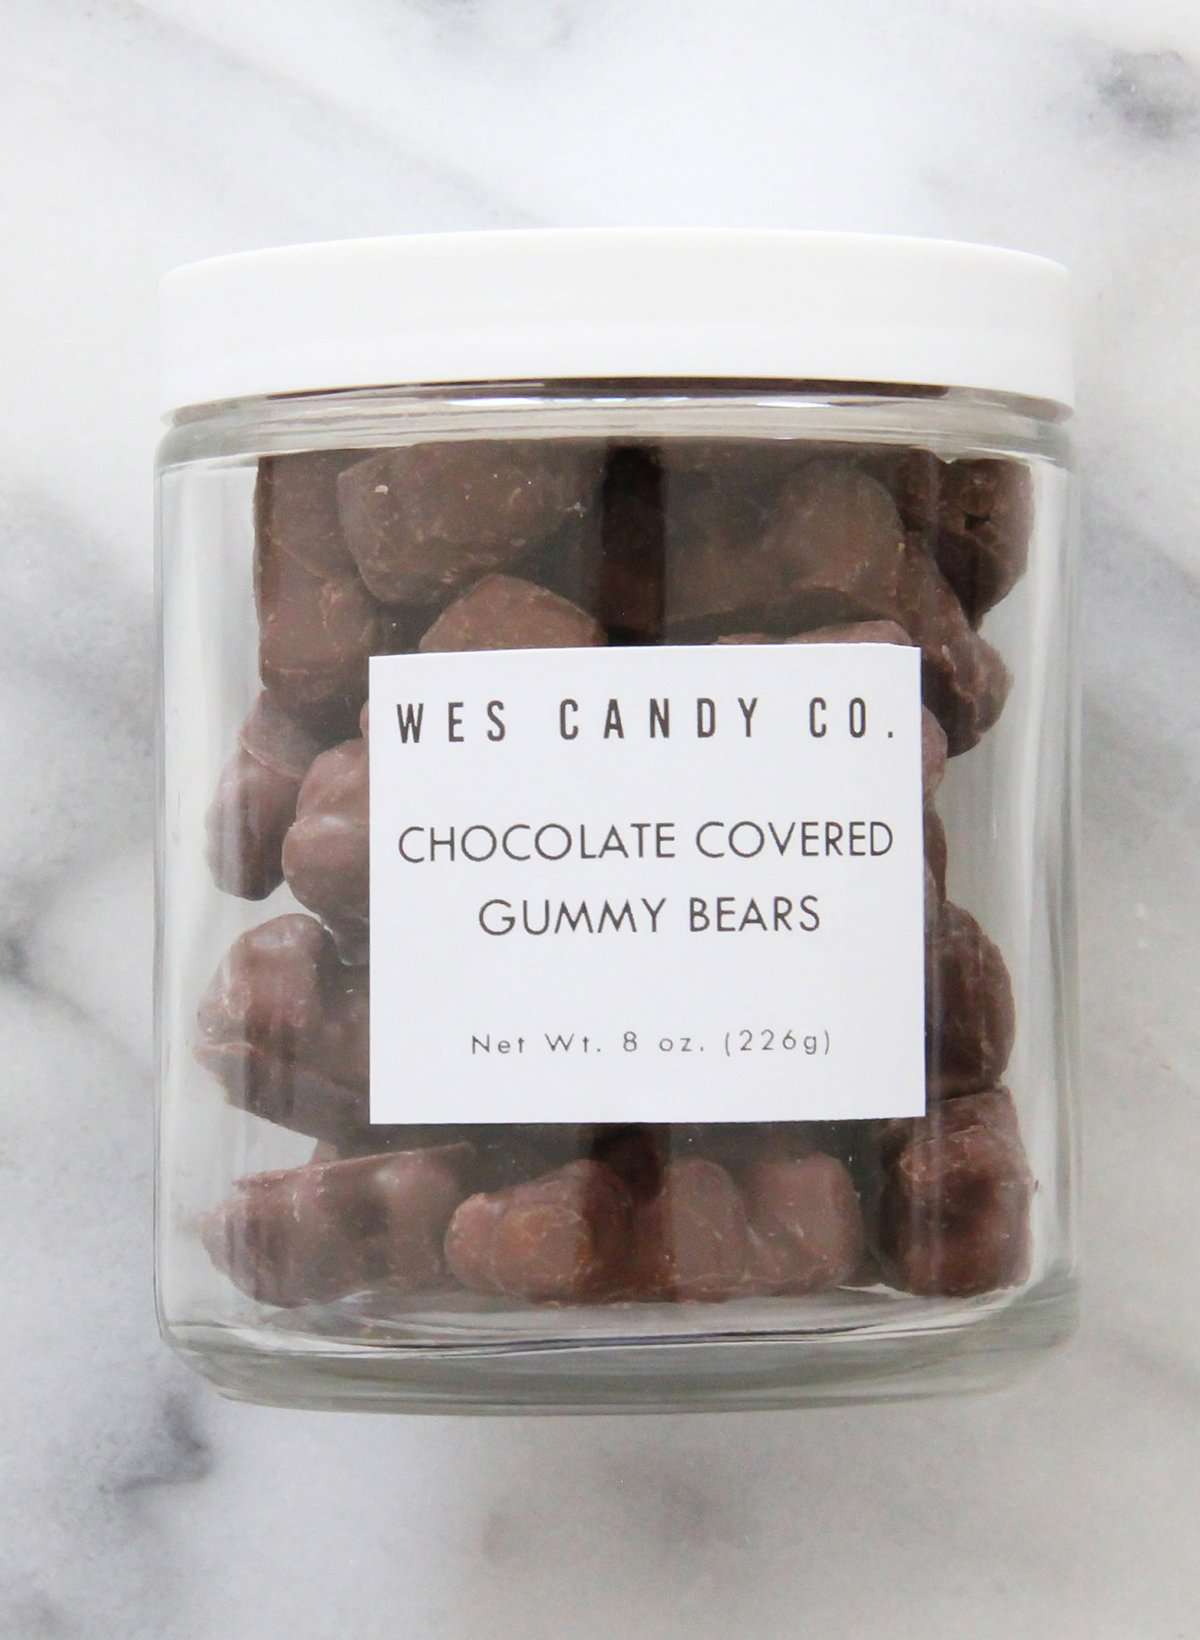 8oz jar assorted chocolate covered gummy bears. Approximately 6 servings.